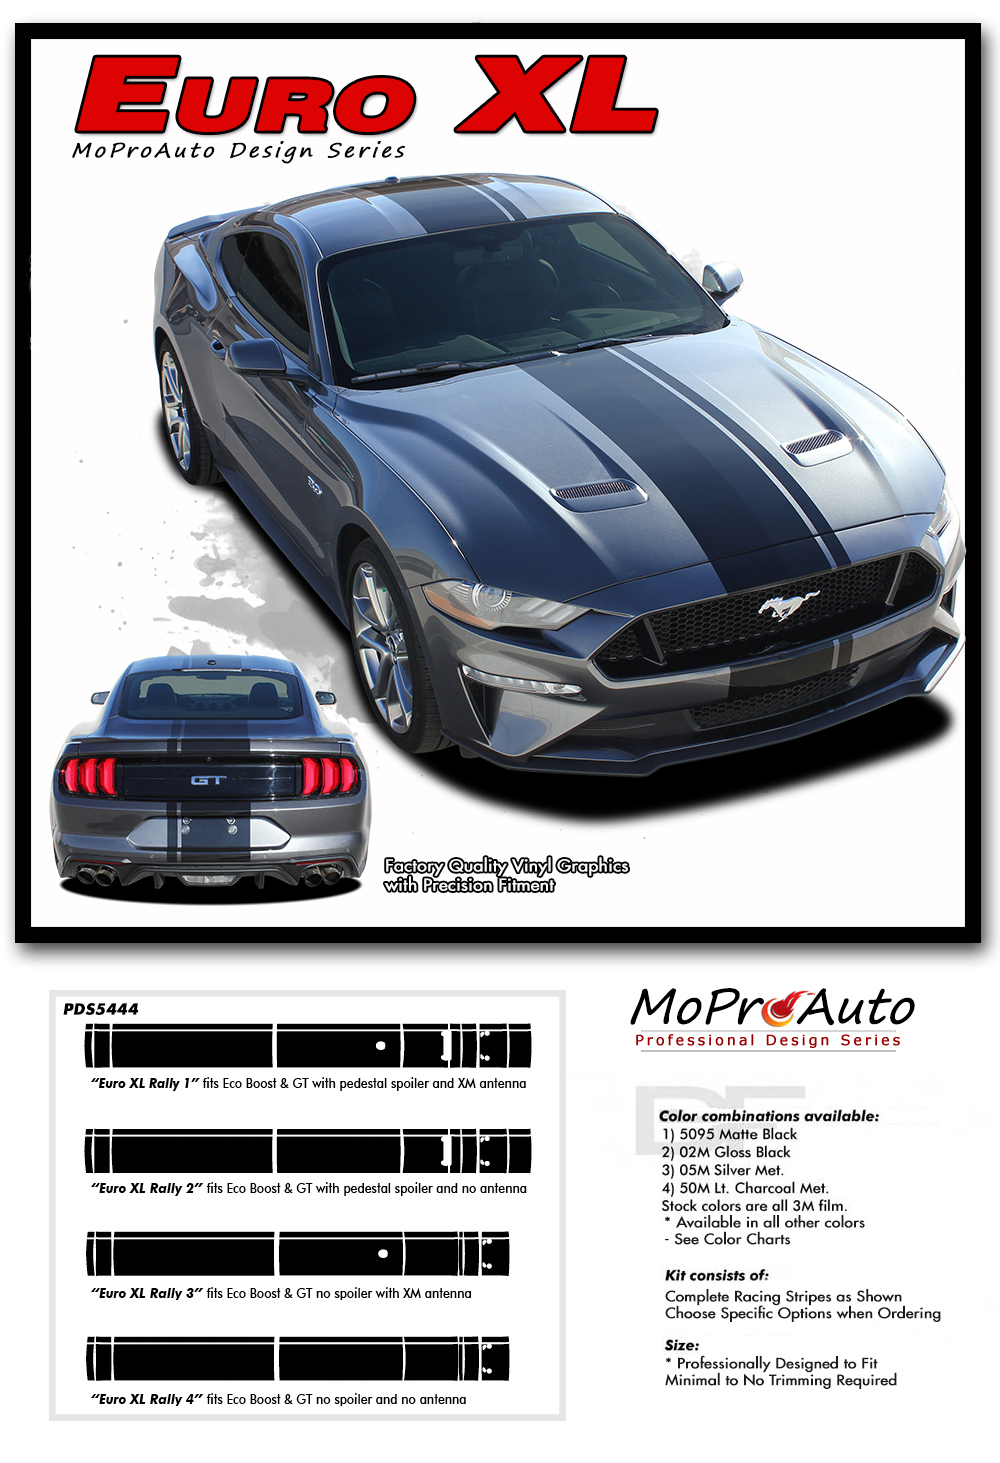 2018 2019 2020 2021 2022 2023 EURO XL RALLY OEM Style Racing Stripes for Ford Mustang - MoProAuto Pro Design Series Vinyl Graphics, Stripes and Decals Kit